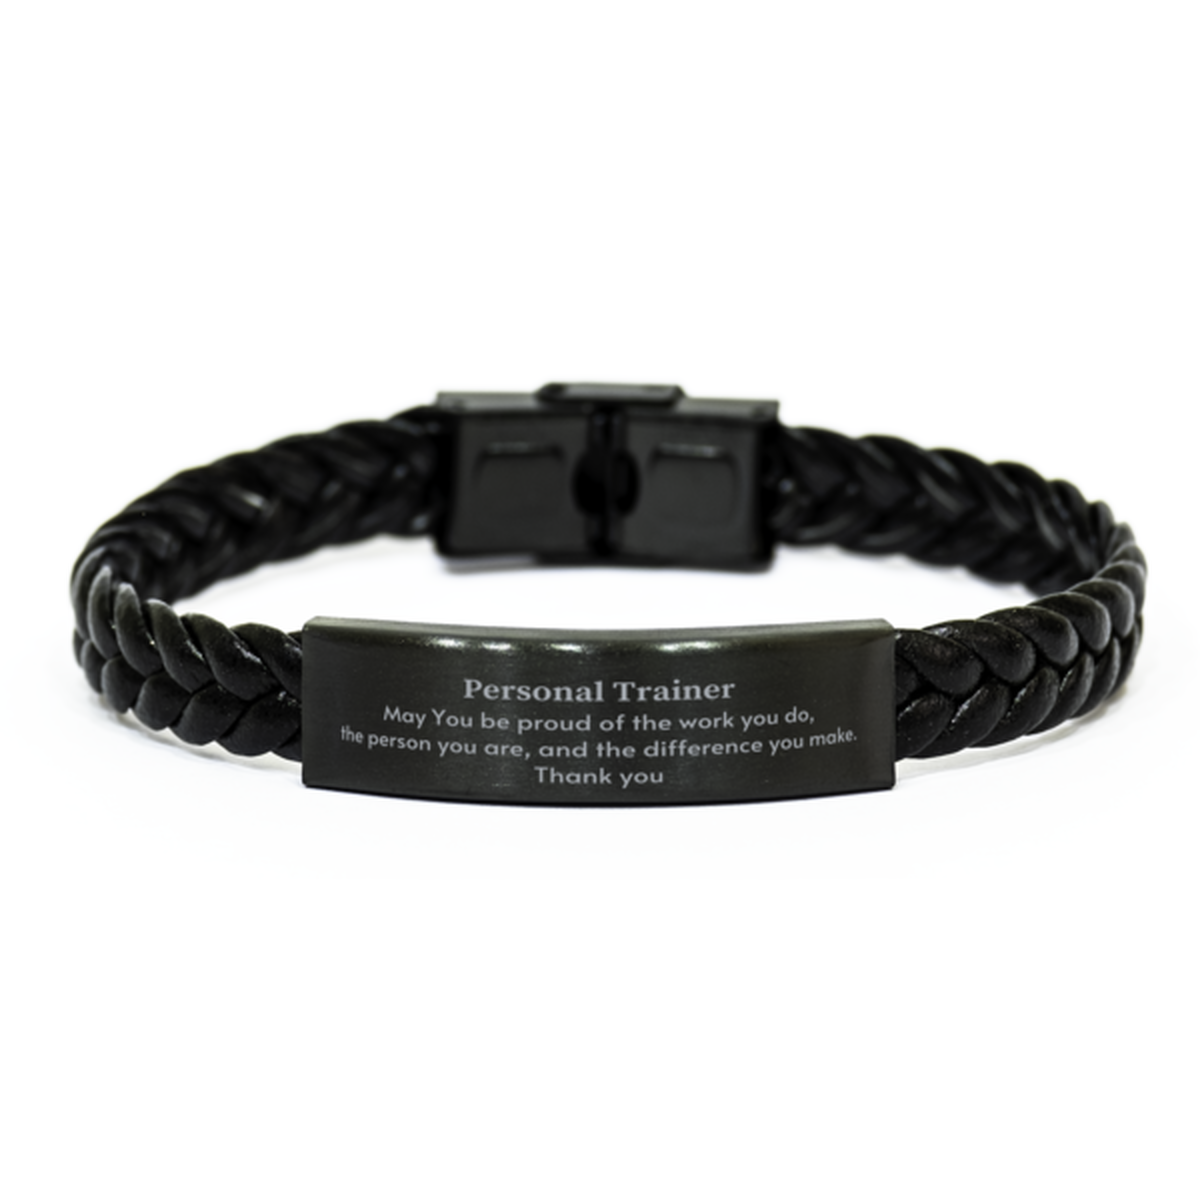 Heartwarming Braided Leather Bracelet Retirement Coworkers Gifts for Personal Trainer, Personal Trainer May You be proud of the work you do, the person you are Gifts for Boss Men Women Friends